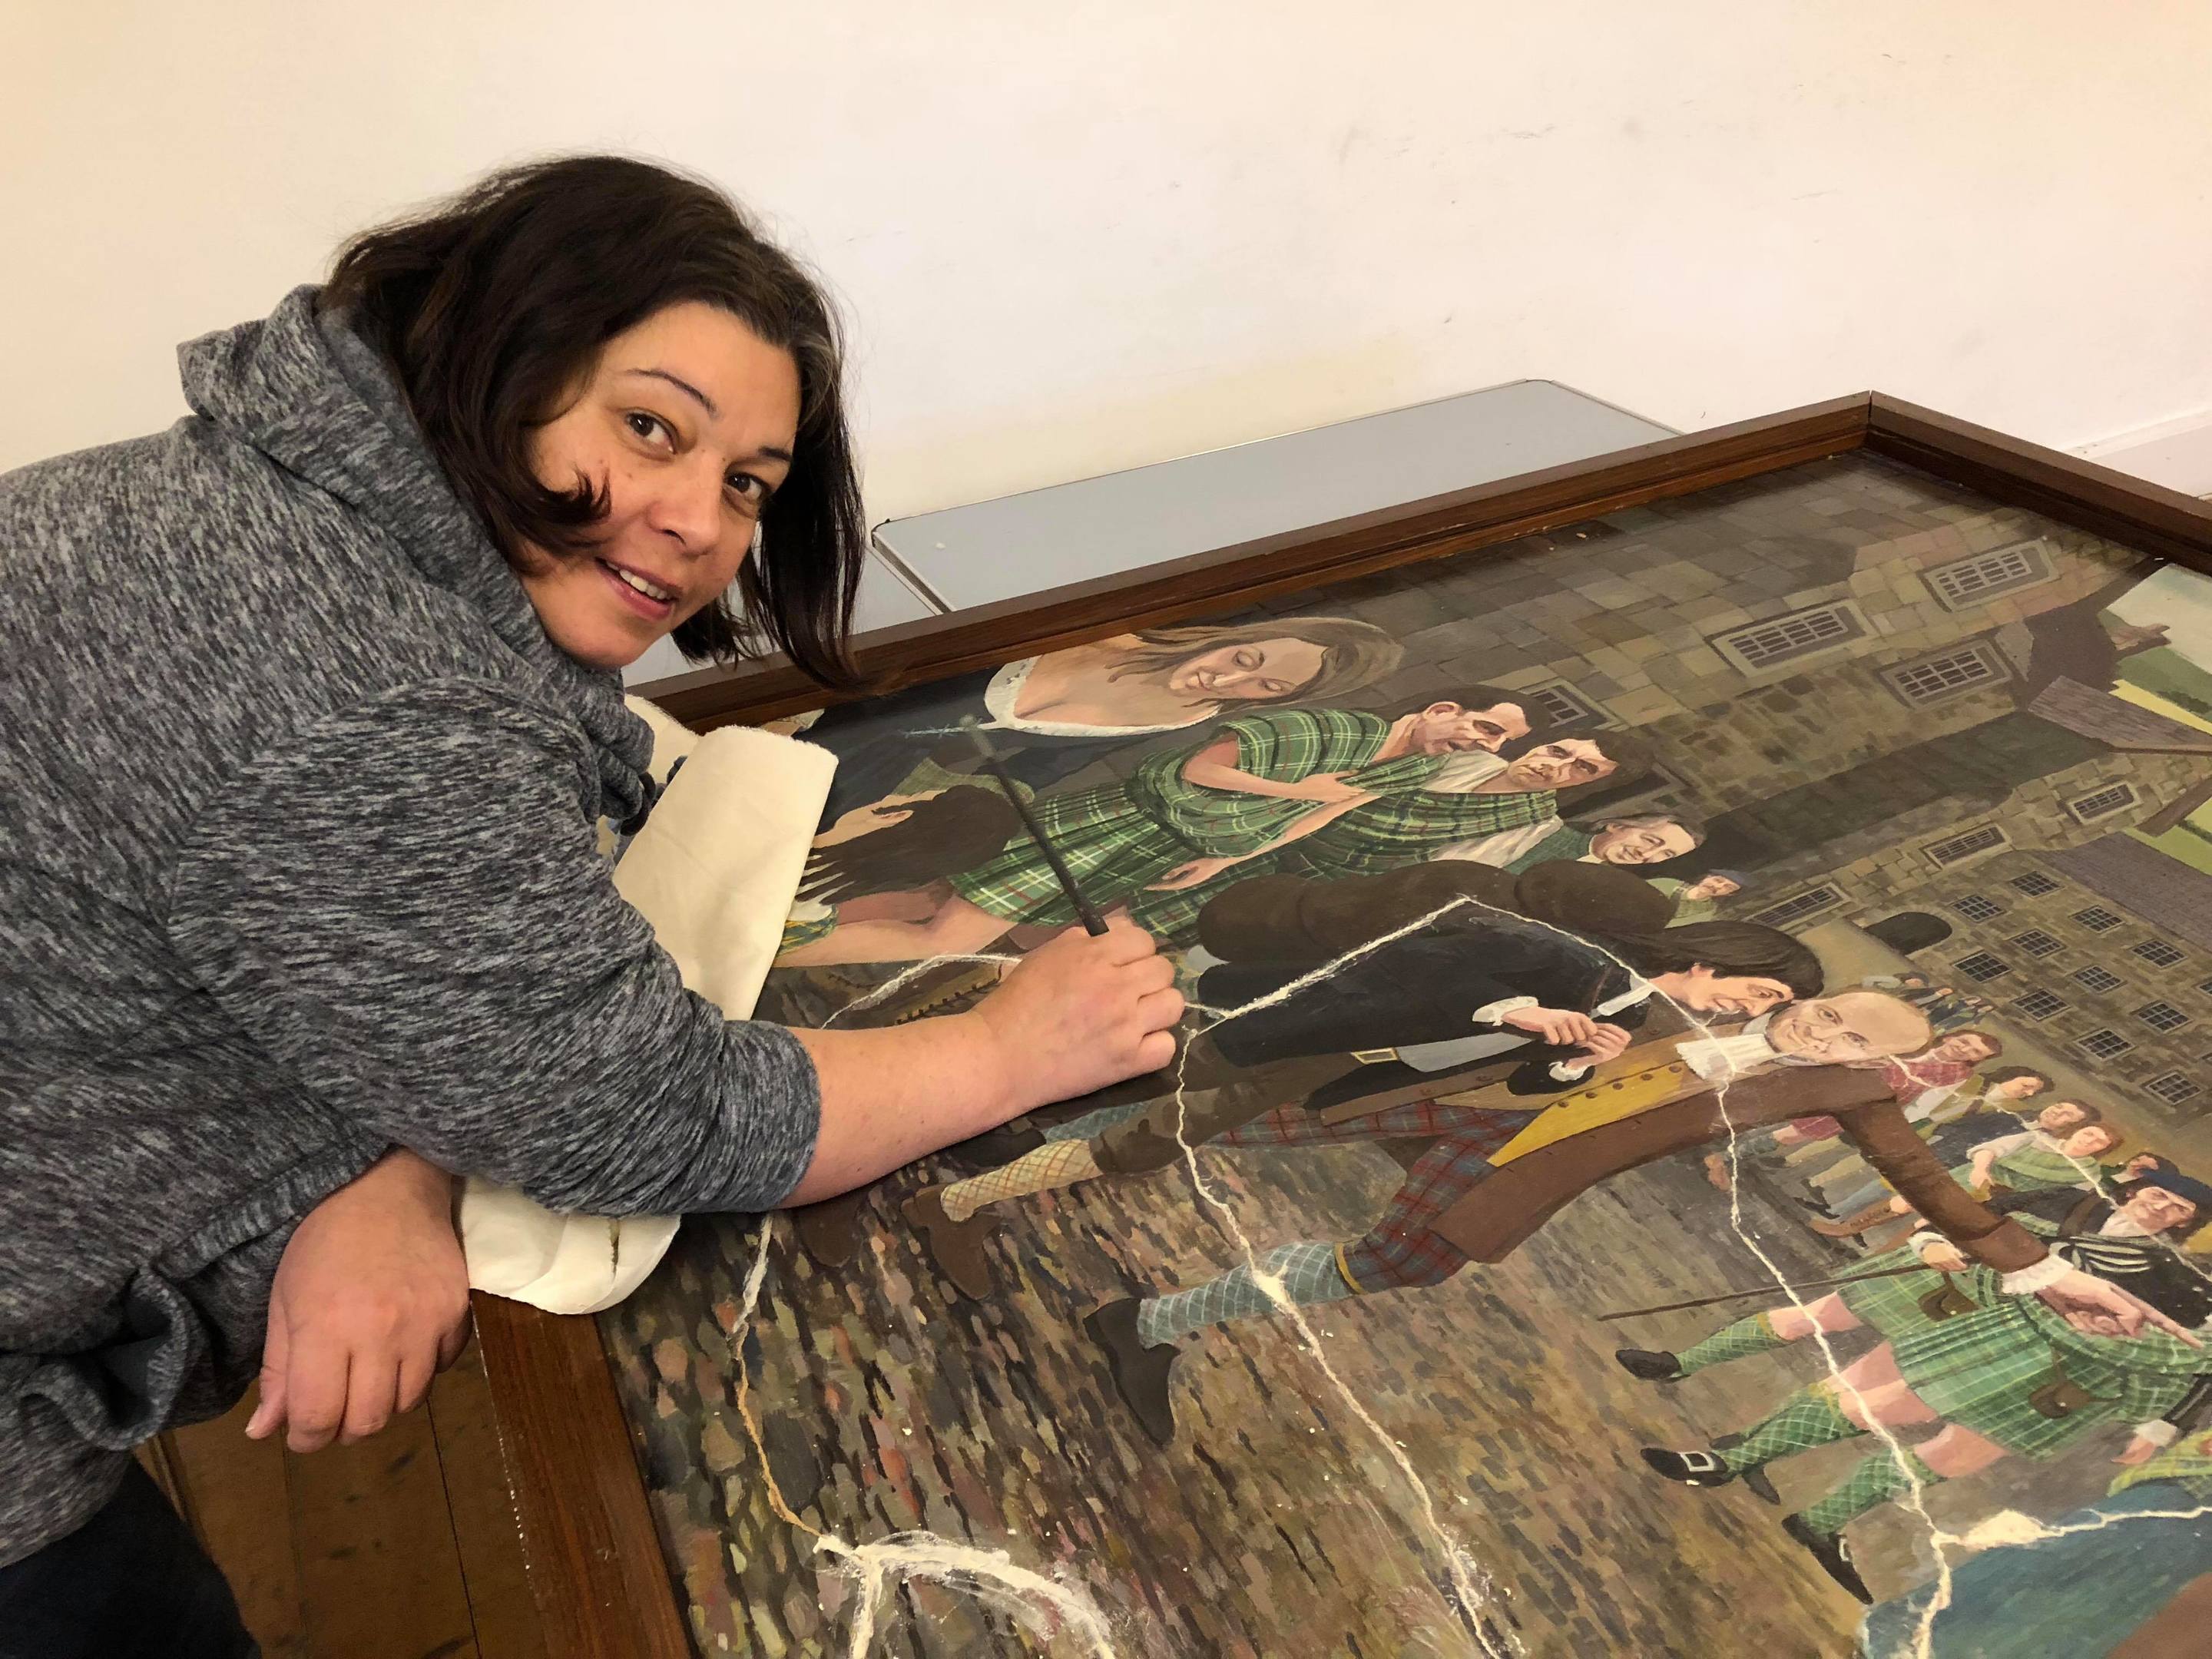 Artist Aneliya Beaton puts the damaged parts of the painting back together